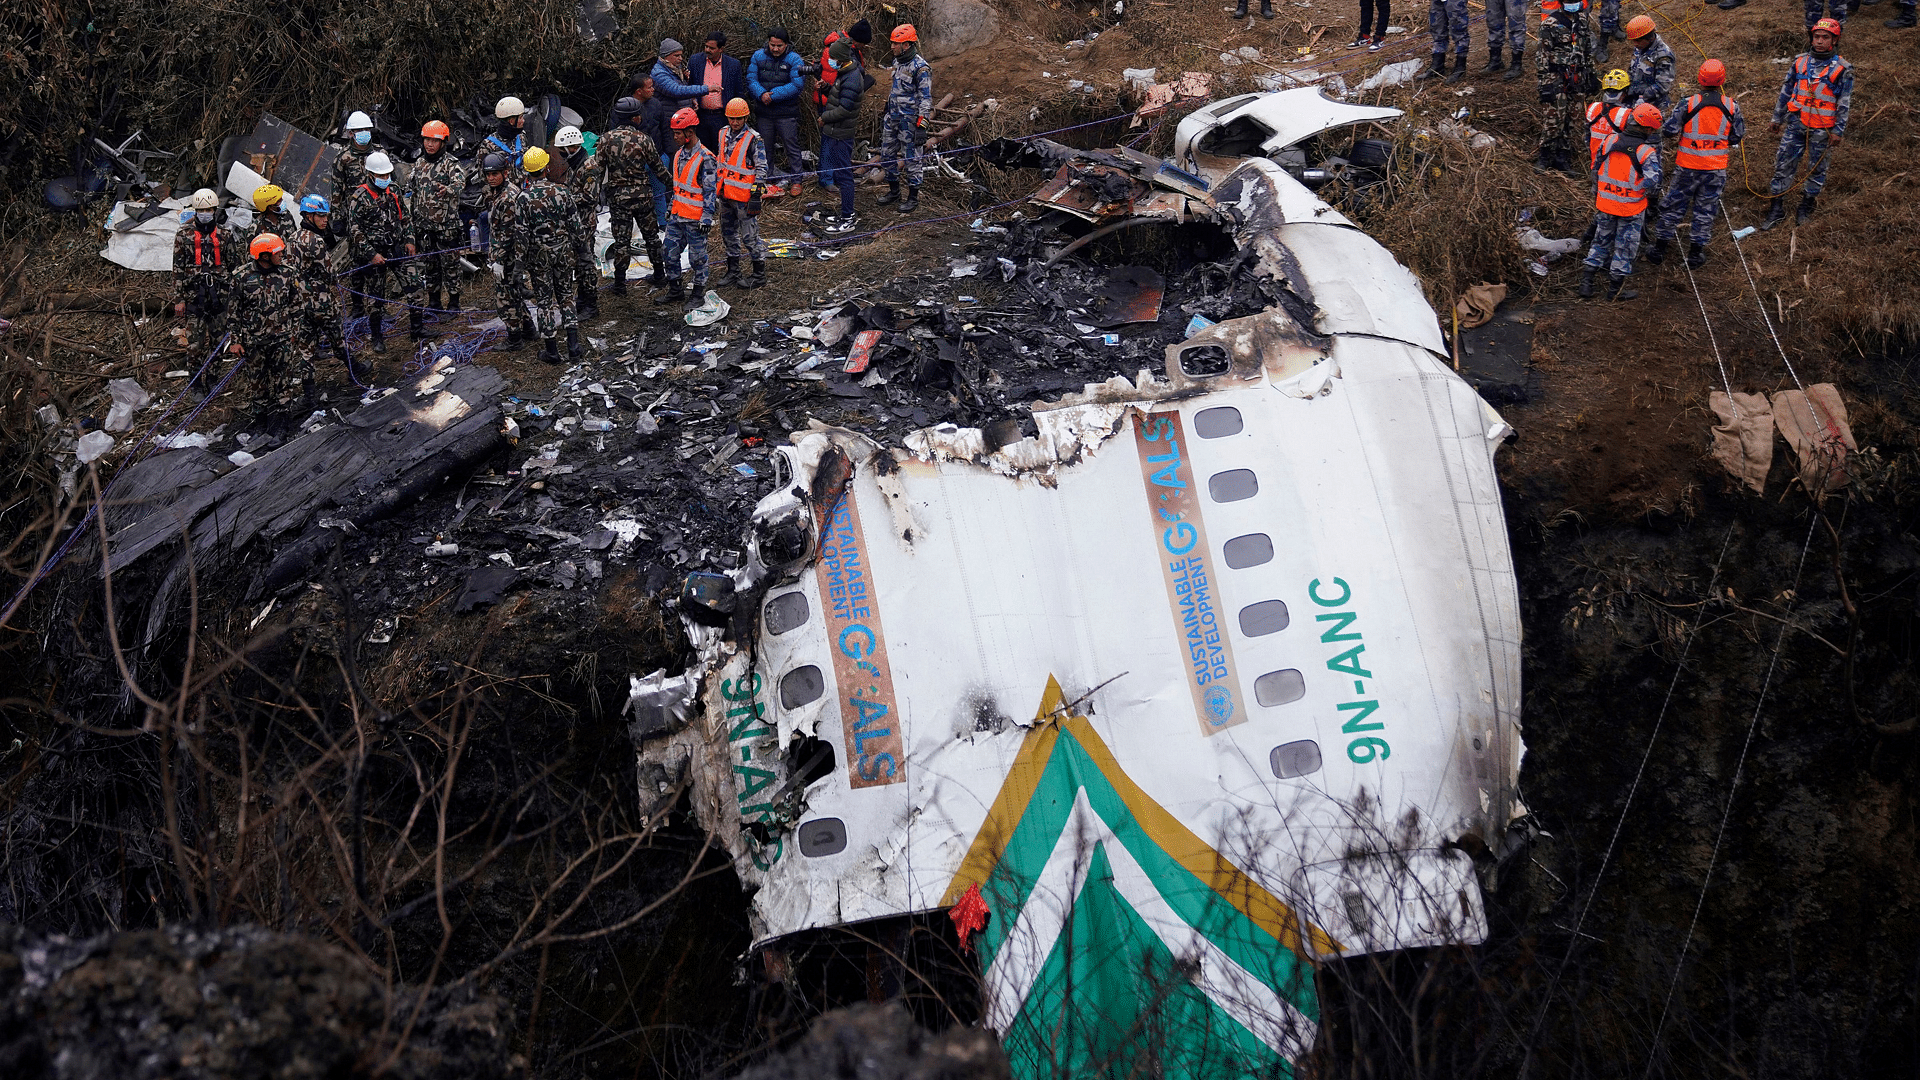 <div class="paragraphs"><p>Minutes before landing on Sunday, 15 January, the Yeti Airlines ATR-72 aircraft with 68 passengers and four crew members on board,&nbsp;<a href="https://www.thequint.com/news/world/yeti-airlines-aircraft-with-72-onboard-crashes-nepal-indians-plane-crash">crashed&nbsp;</a>into a river gorge, close to the Pokhara International Airport in Nepal. So far, 70 people have been confirmed dead by the Civil Aviation Authority of Nepal (CAAN).</p></div>